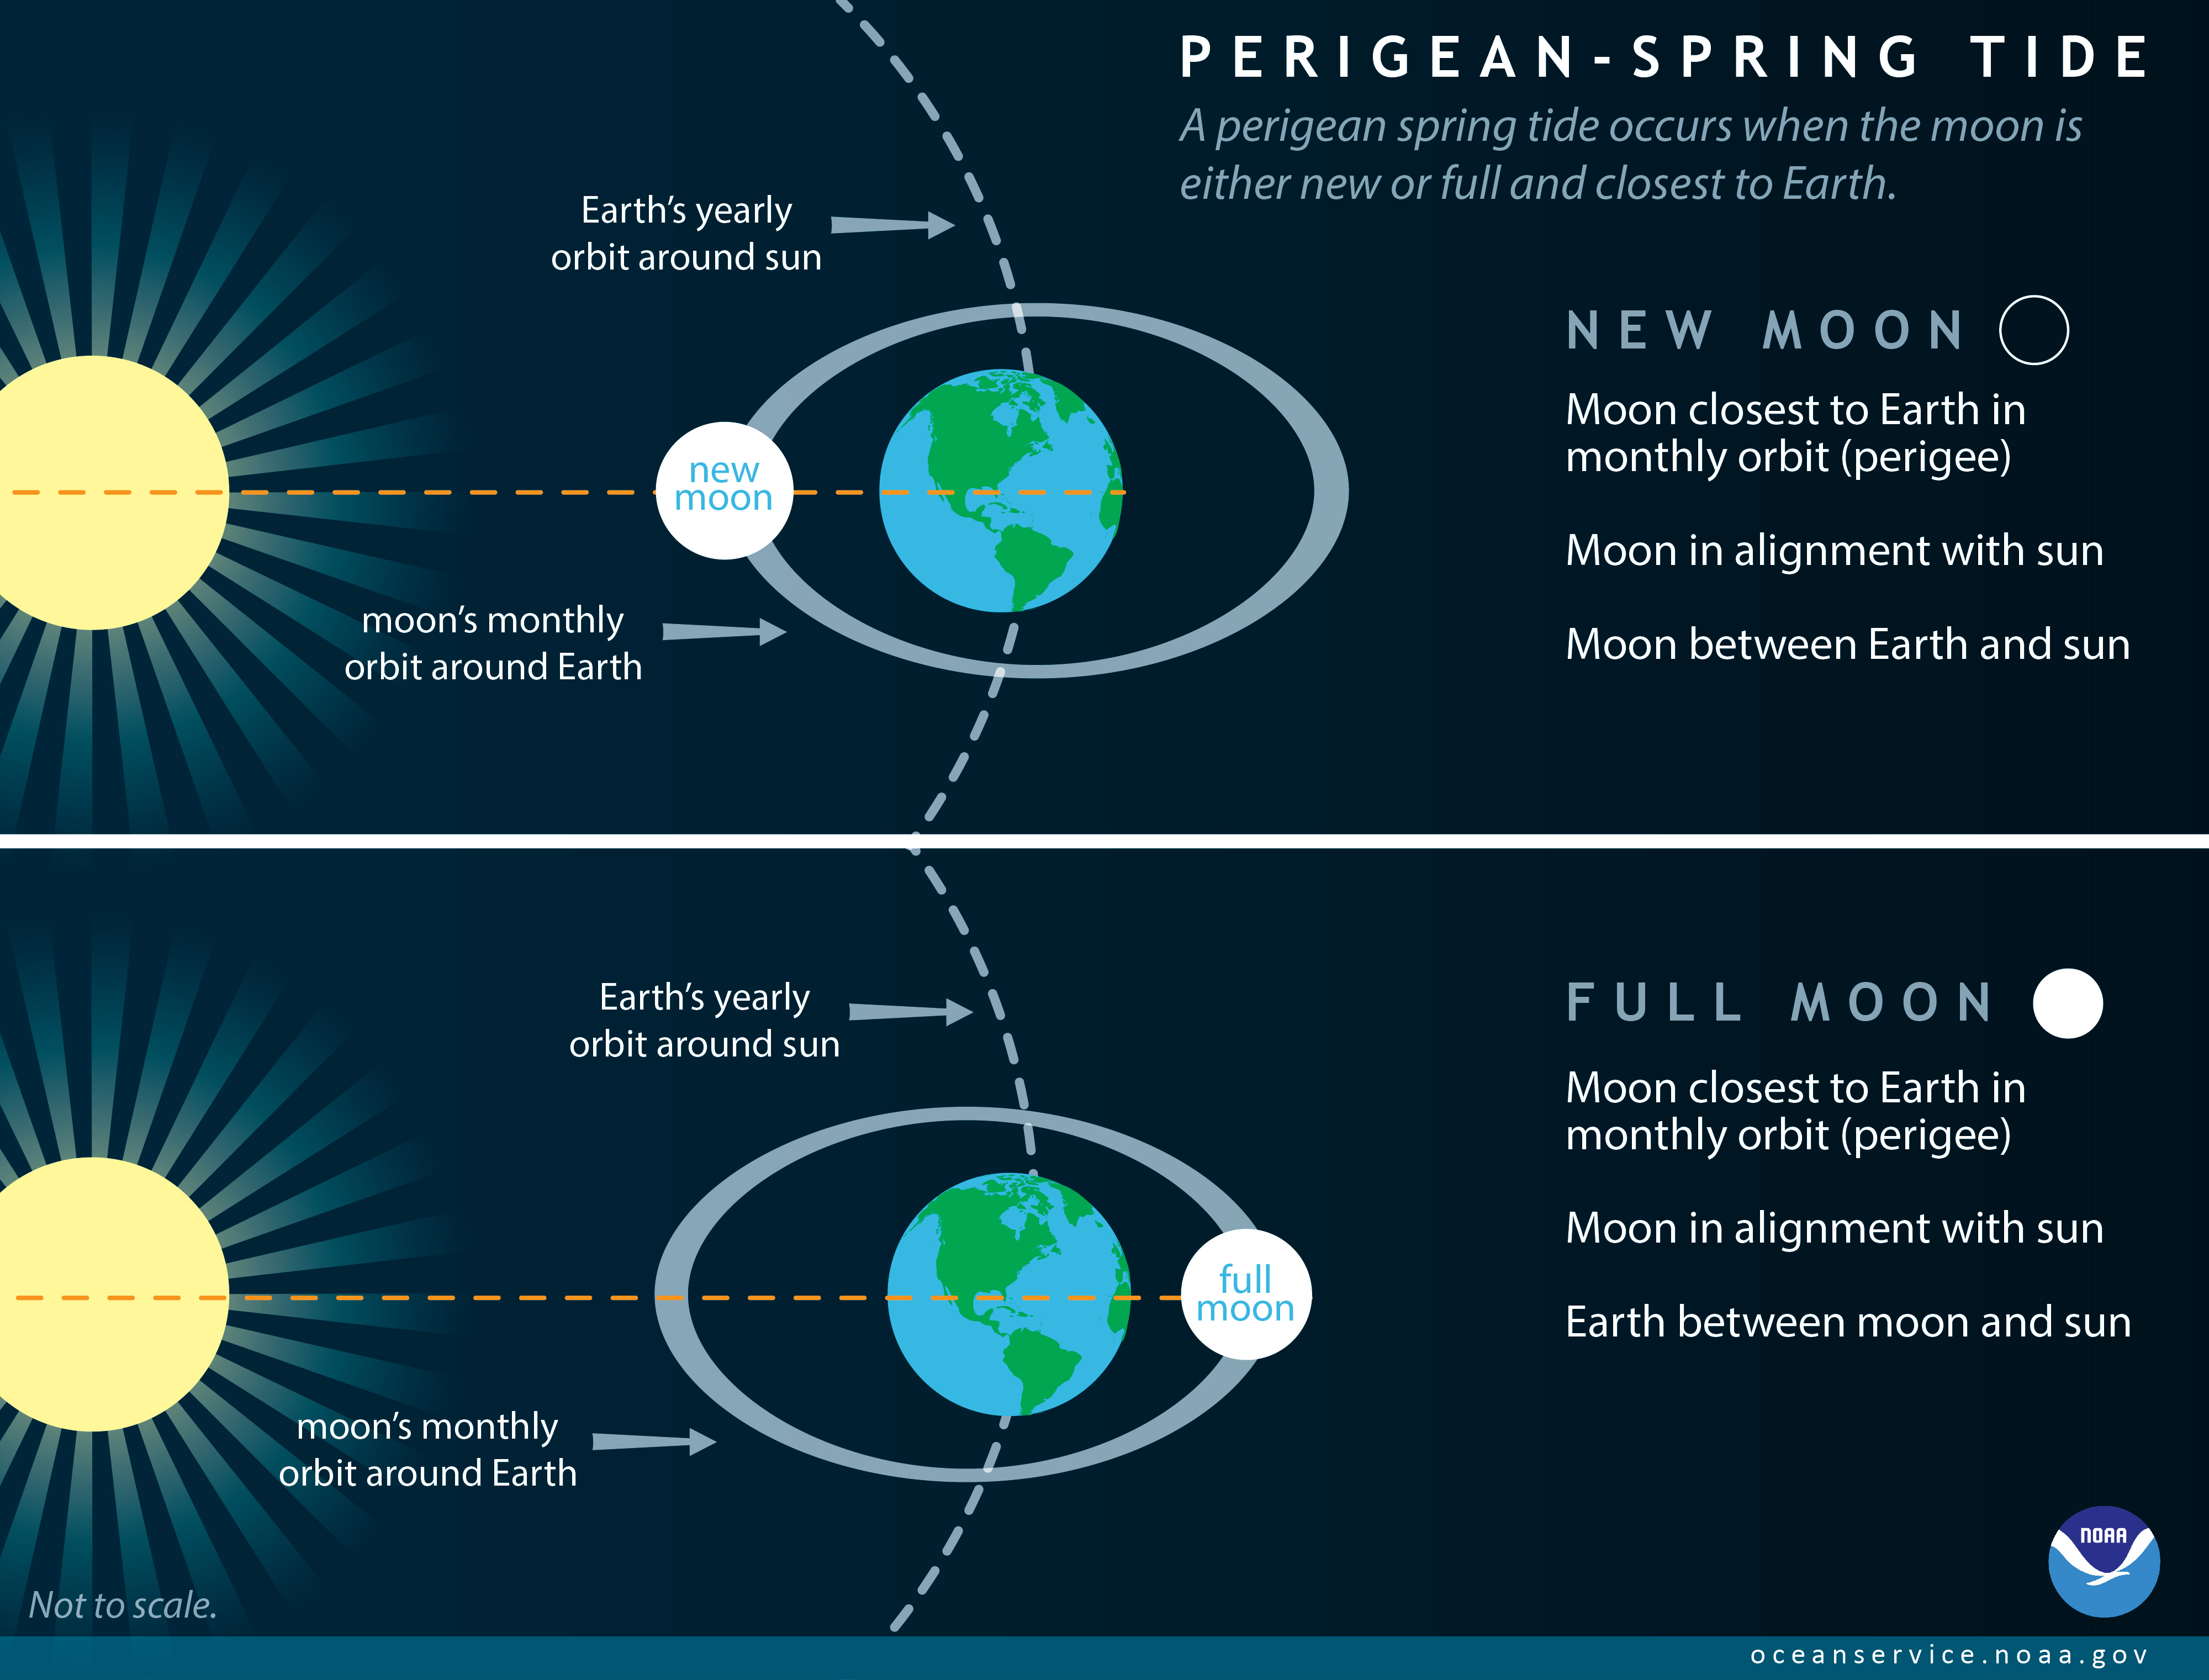 What is a perigean spring tide?